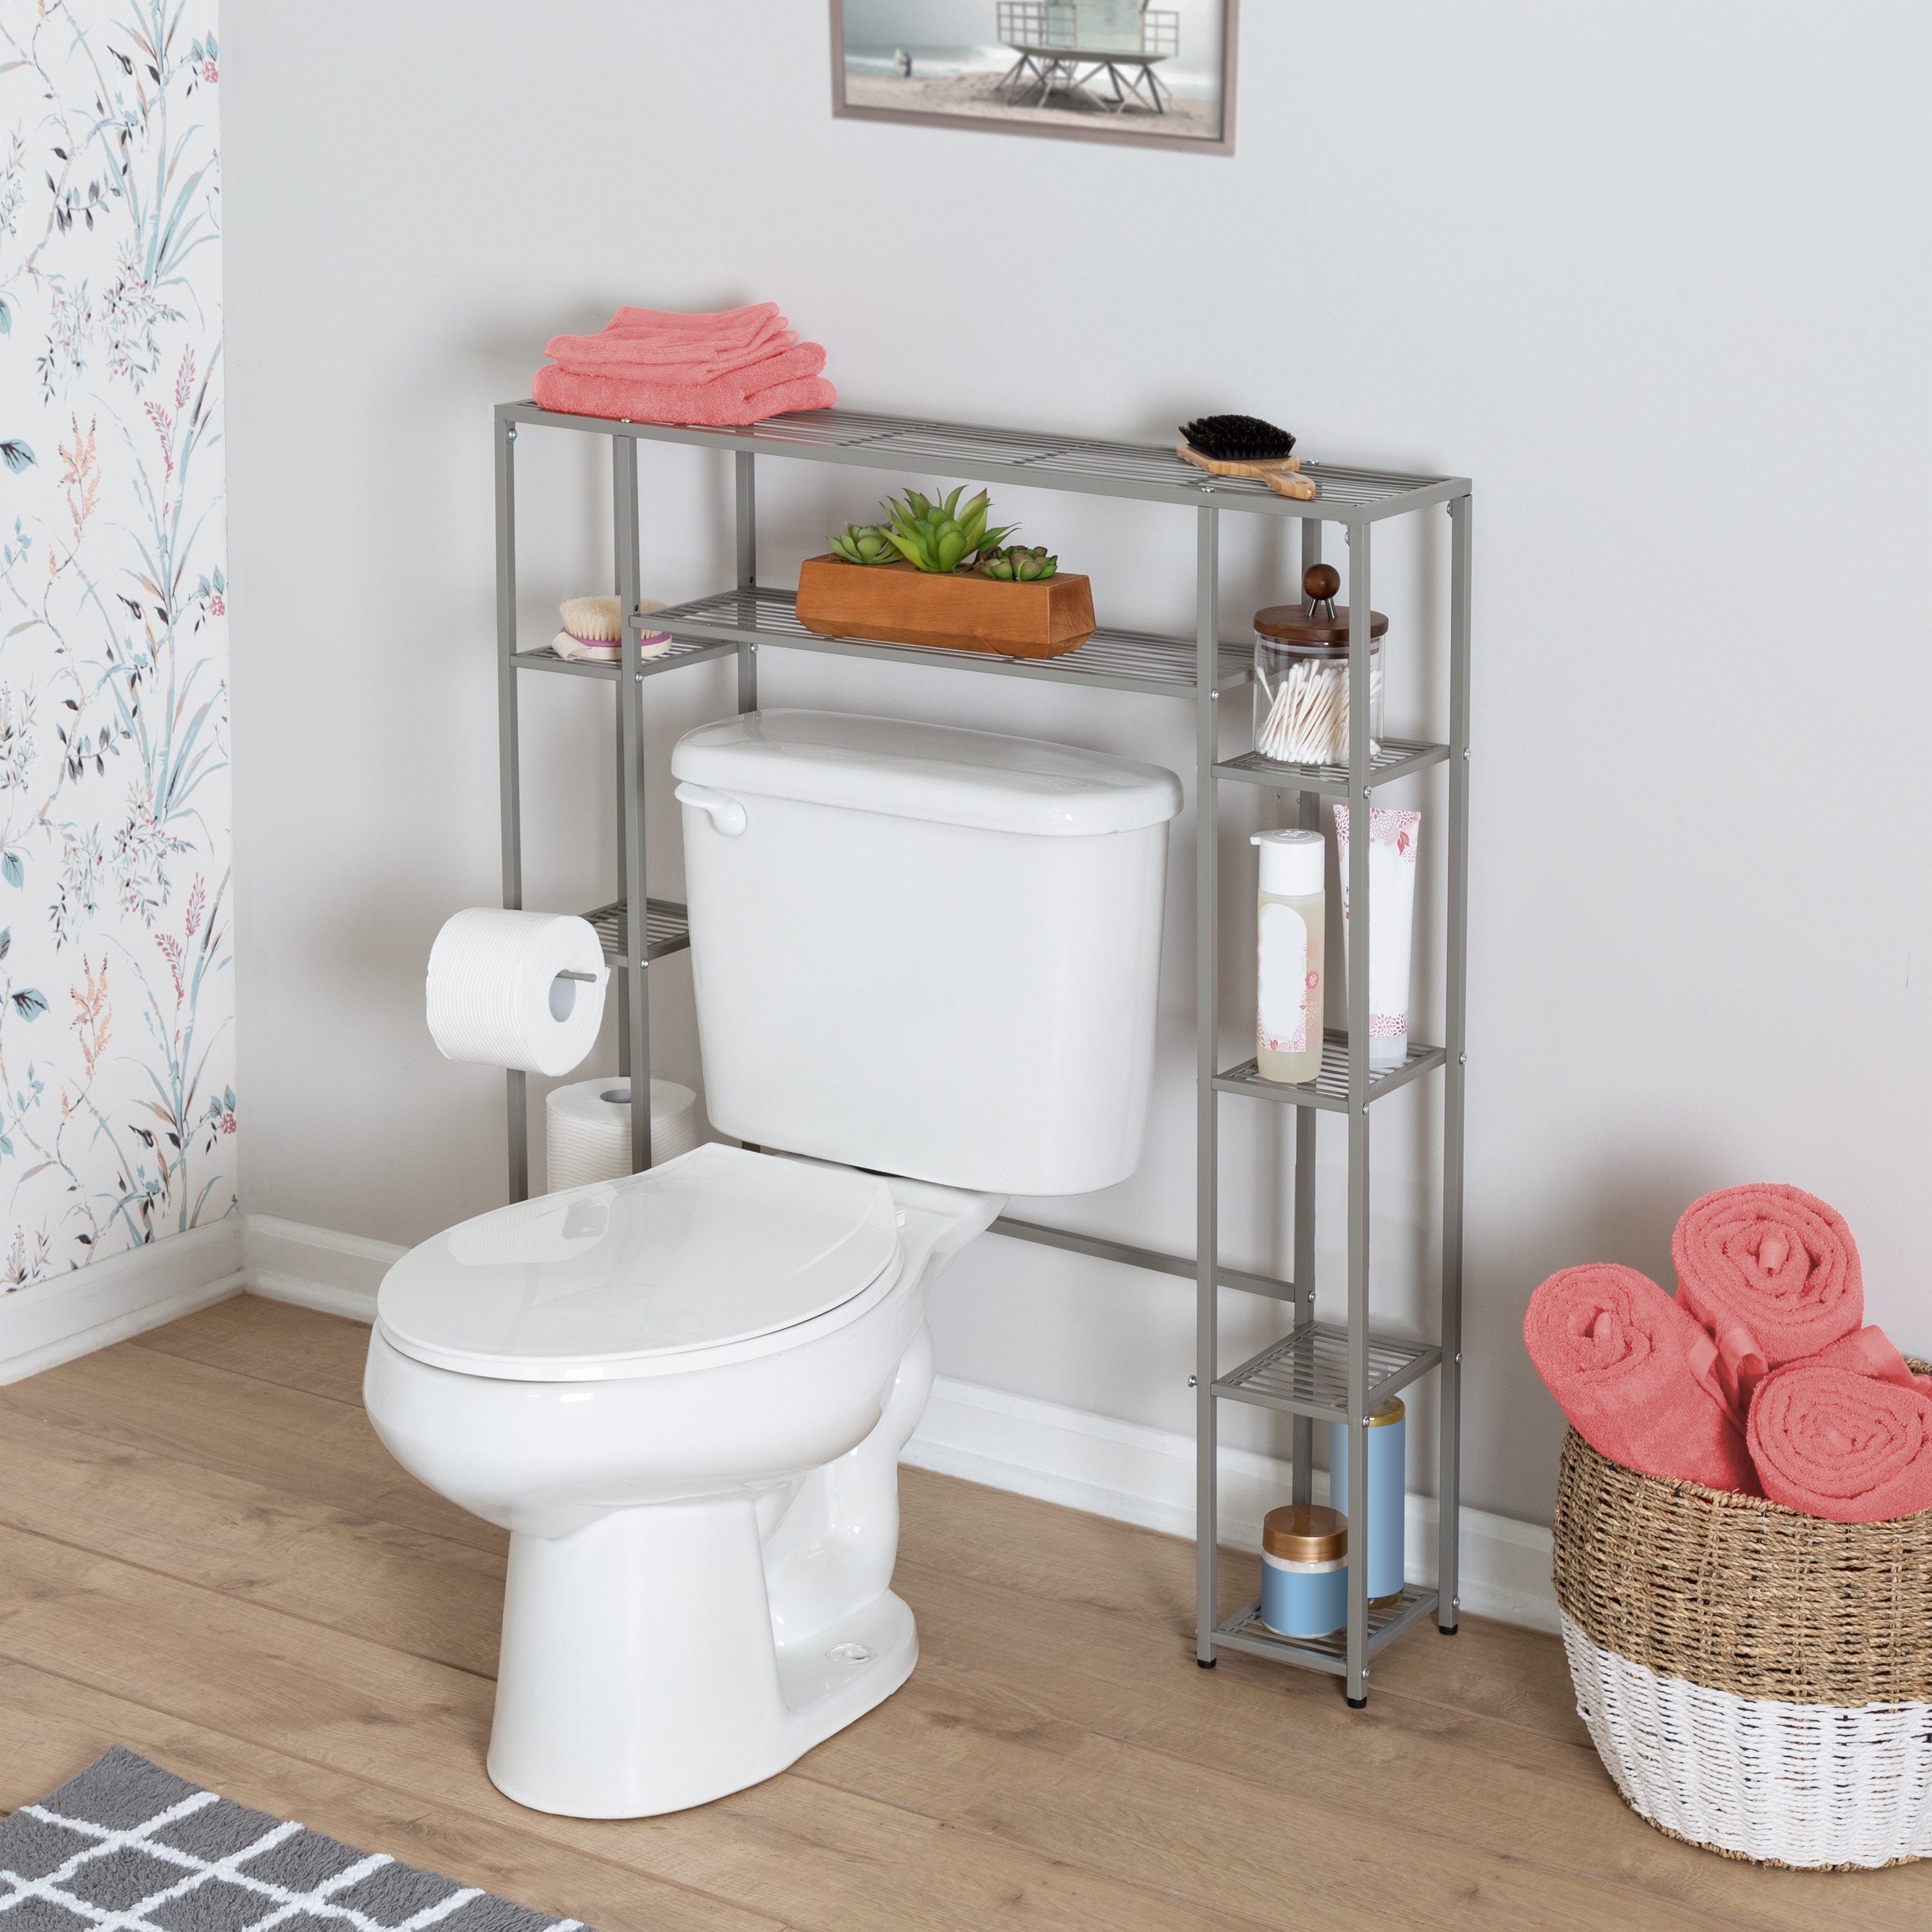 https://ak1.ostkcdn.com/images/products/is/images/direct/df768f51394381eb2412d7ffd1ef3b3d43e75f63/Satin-Nickel-Steel-5-Tier-Over-the-Toilet-Storage-Shelf.jpg